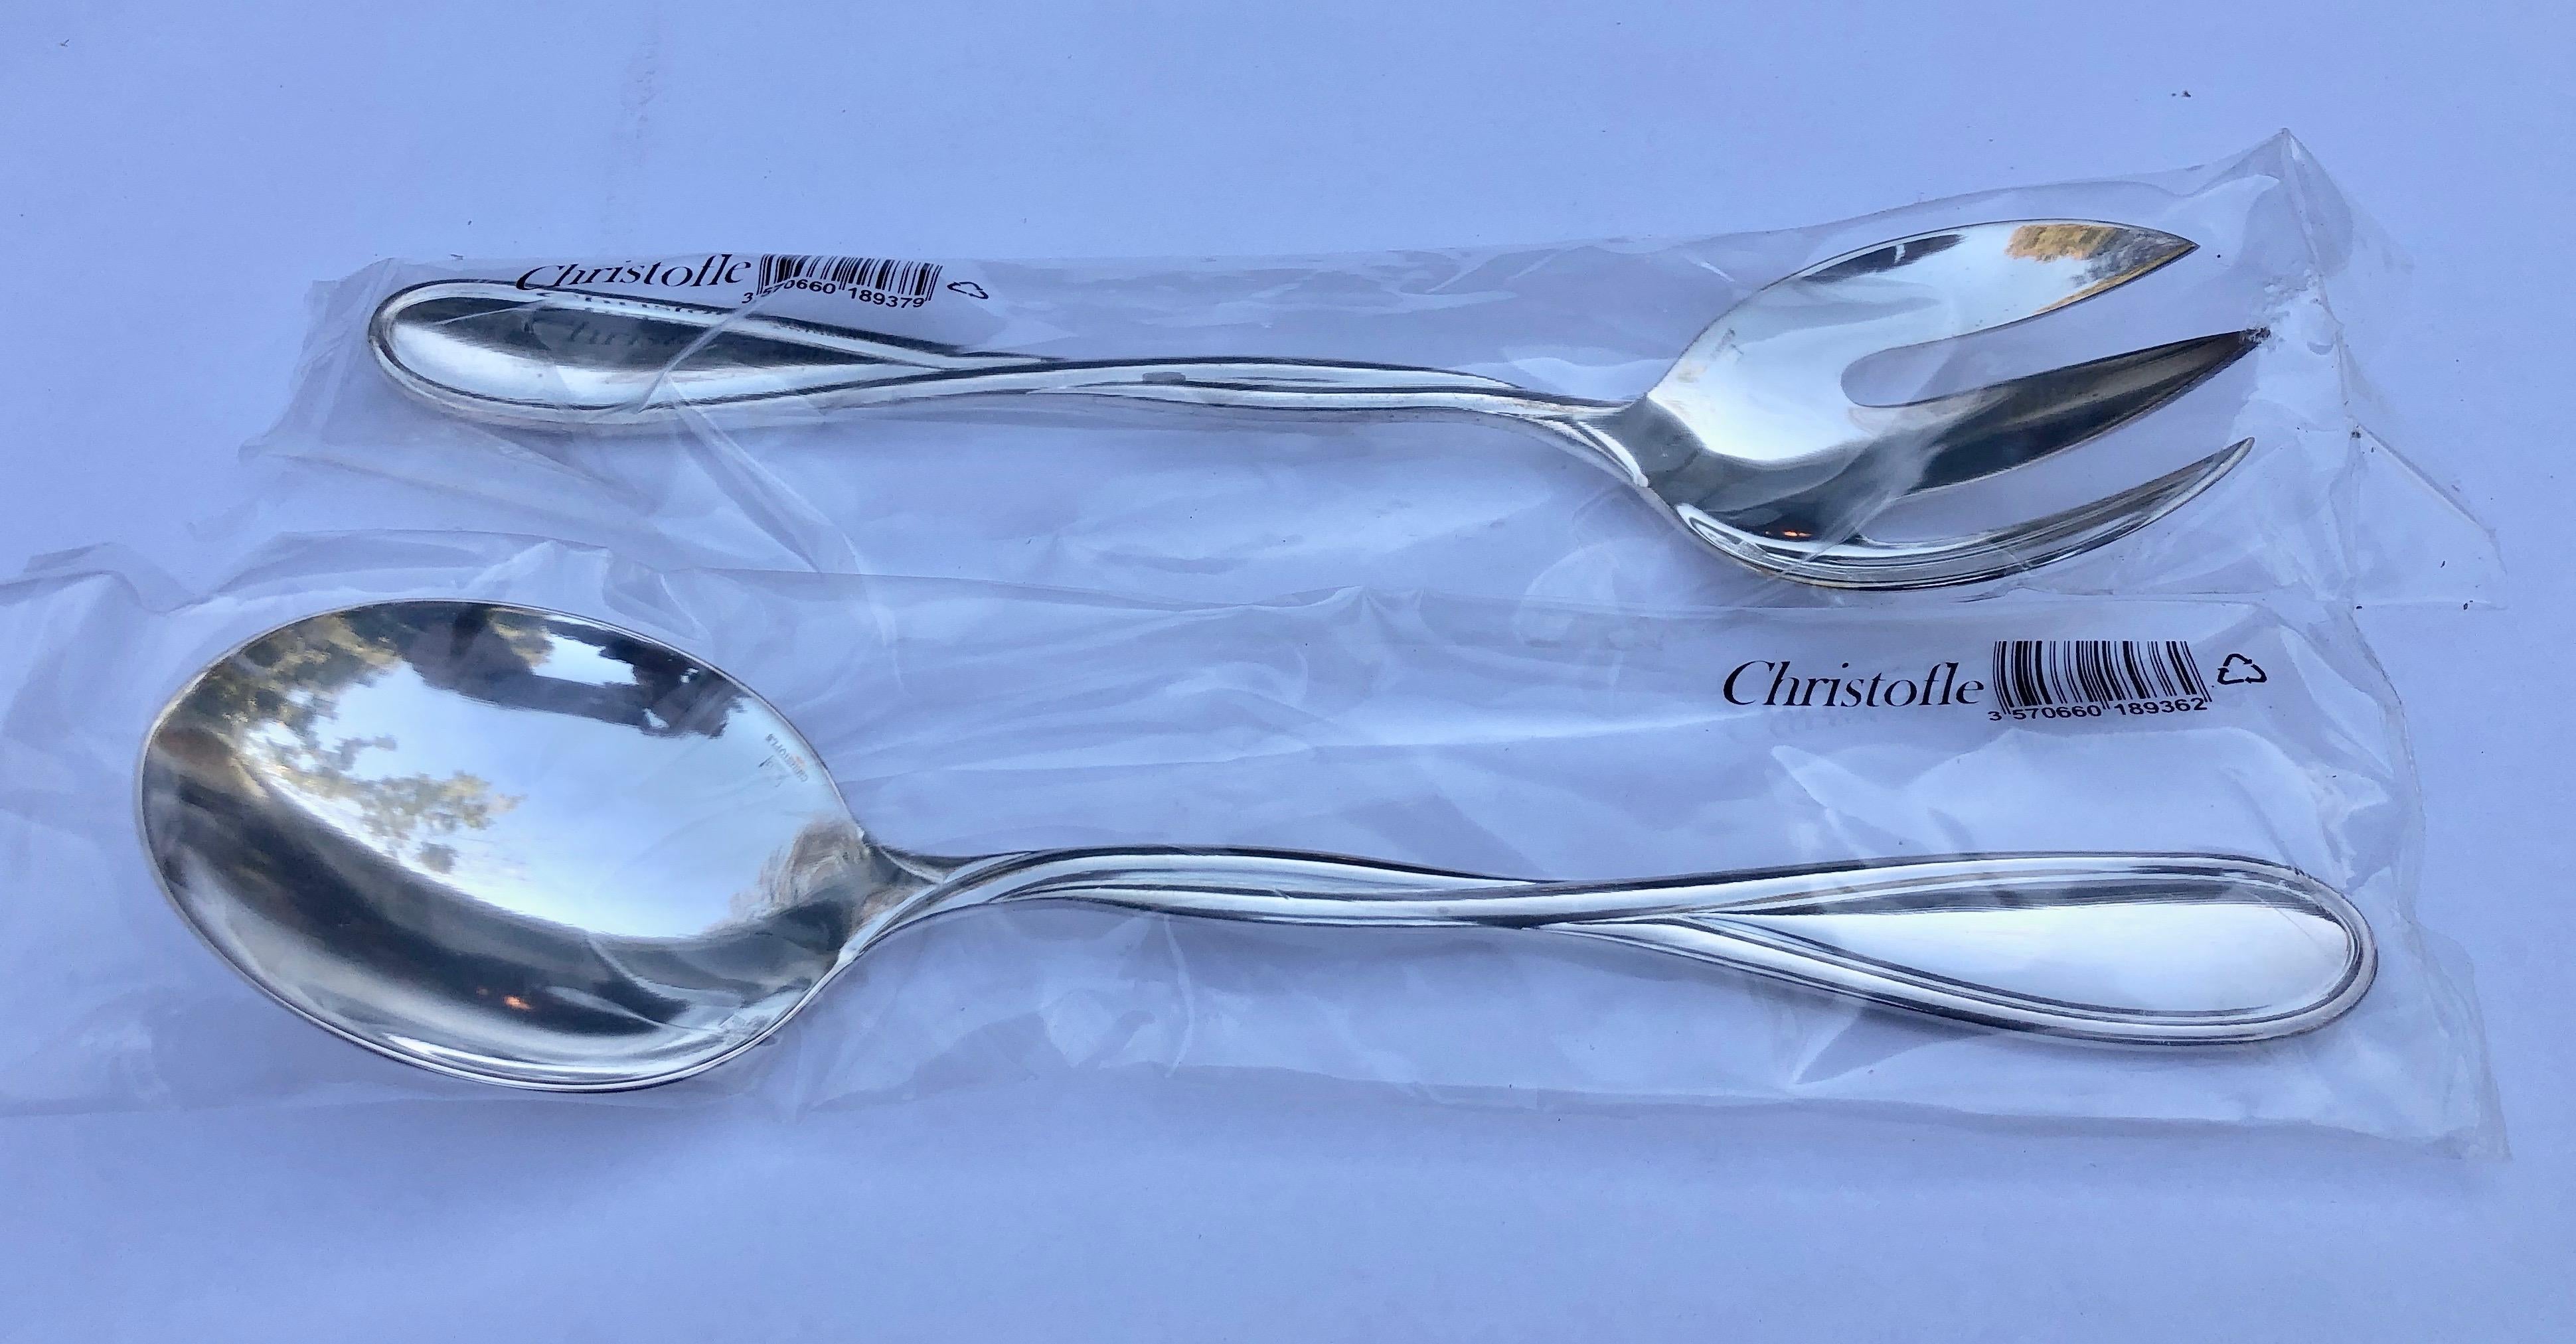 French Christofle Silver Plated Galea, Salad Set of a Serving Fork and Spoon For Sale 14